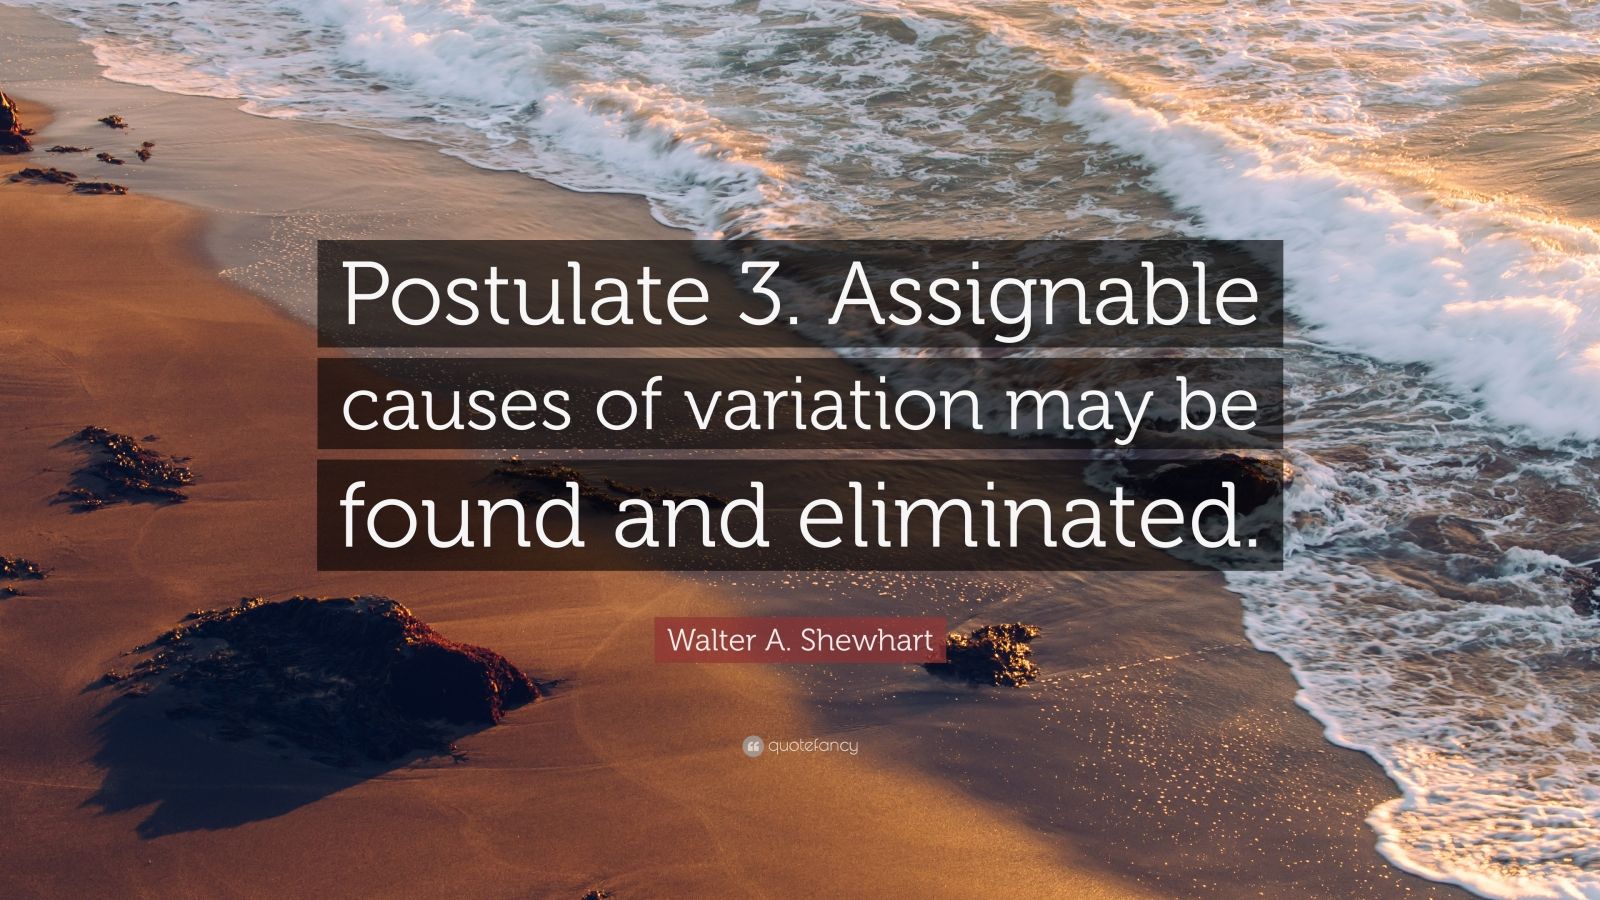 assignable variation may be due to